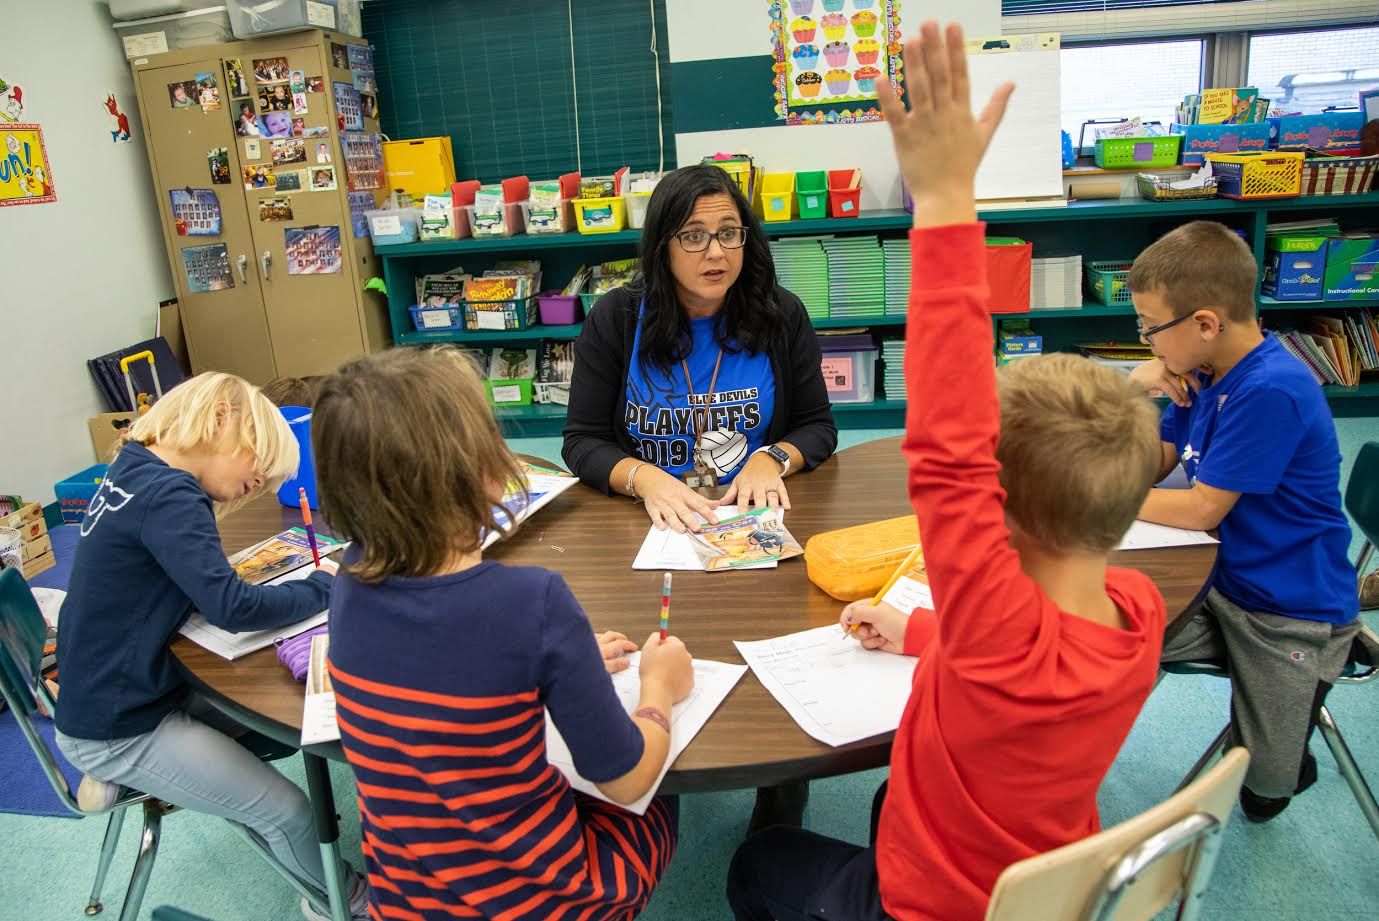 First-grade teacher Niva Vargo works with her students on a reading activity at David Leech Elementary in Leechburg. Image by Andrew Rush. United States, 2019.